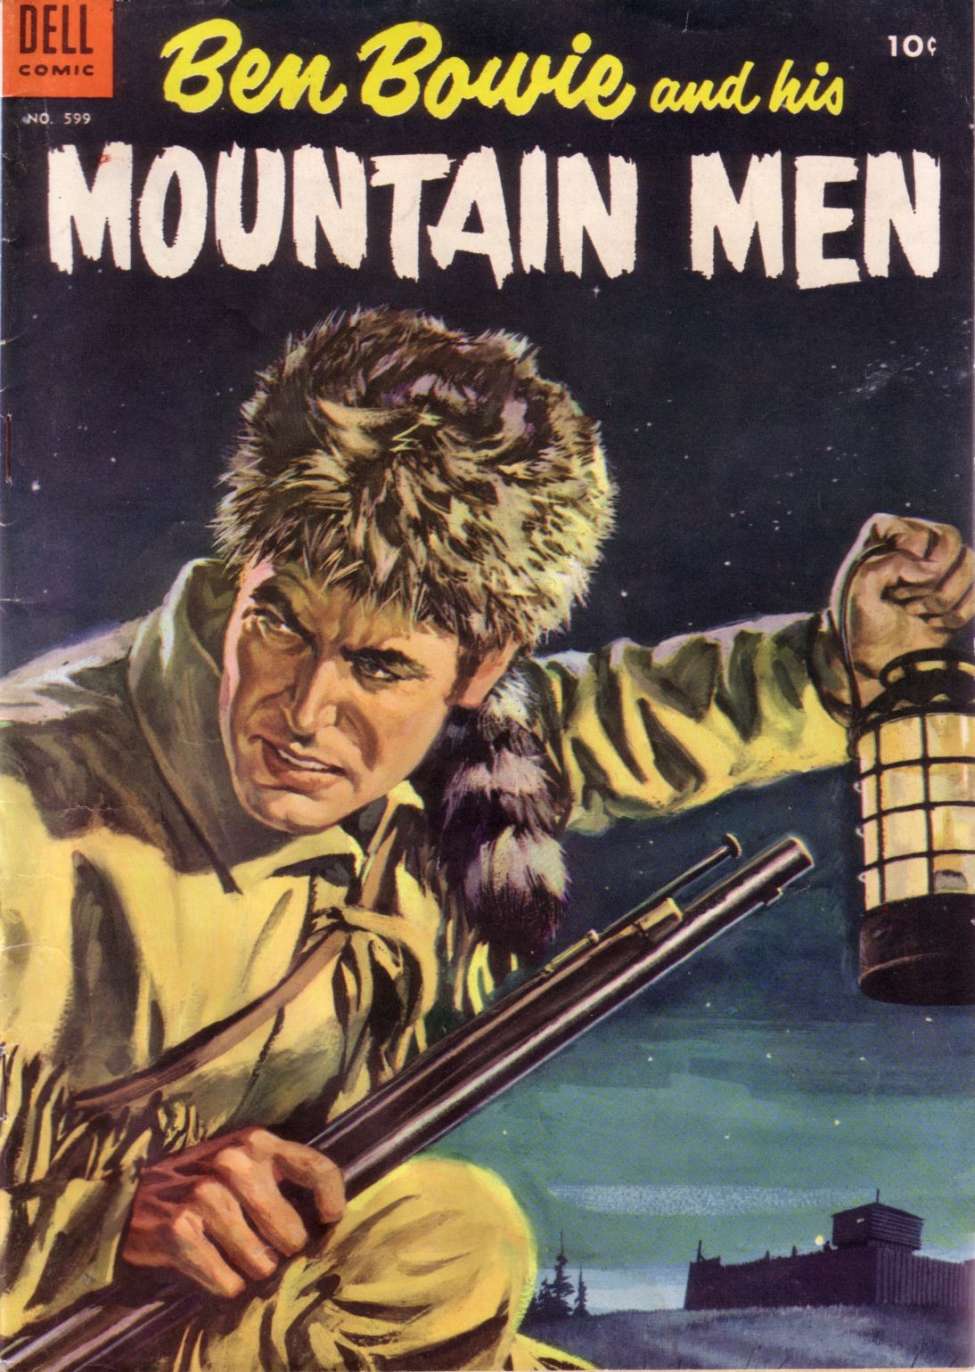 Book Cover For 0599 - Ben Bowie and his Mountain Men